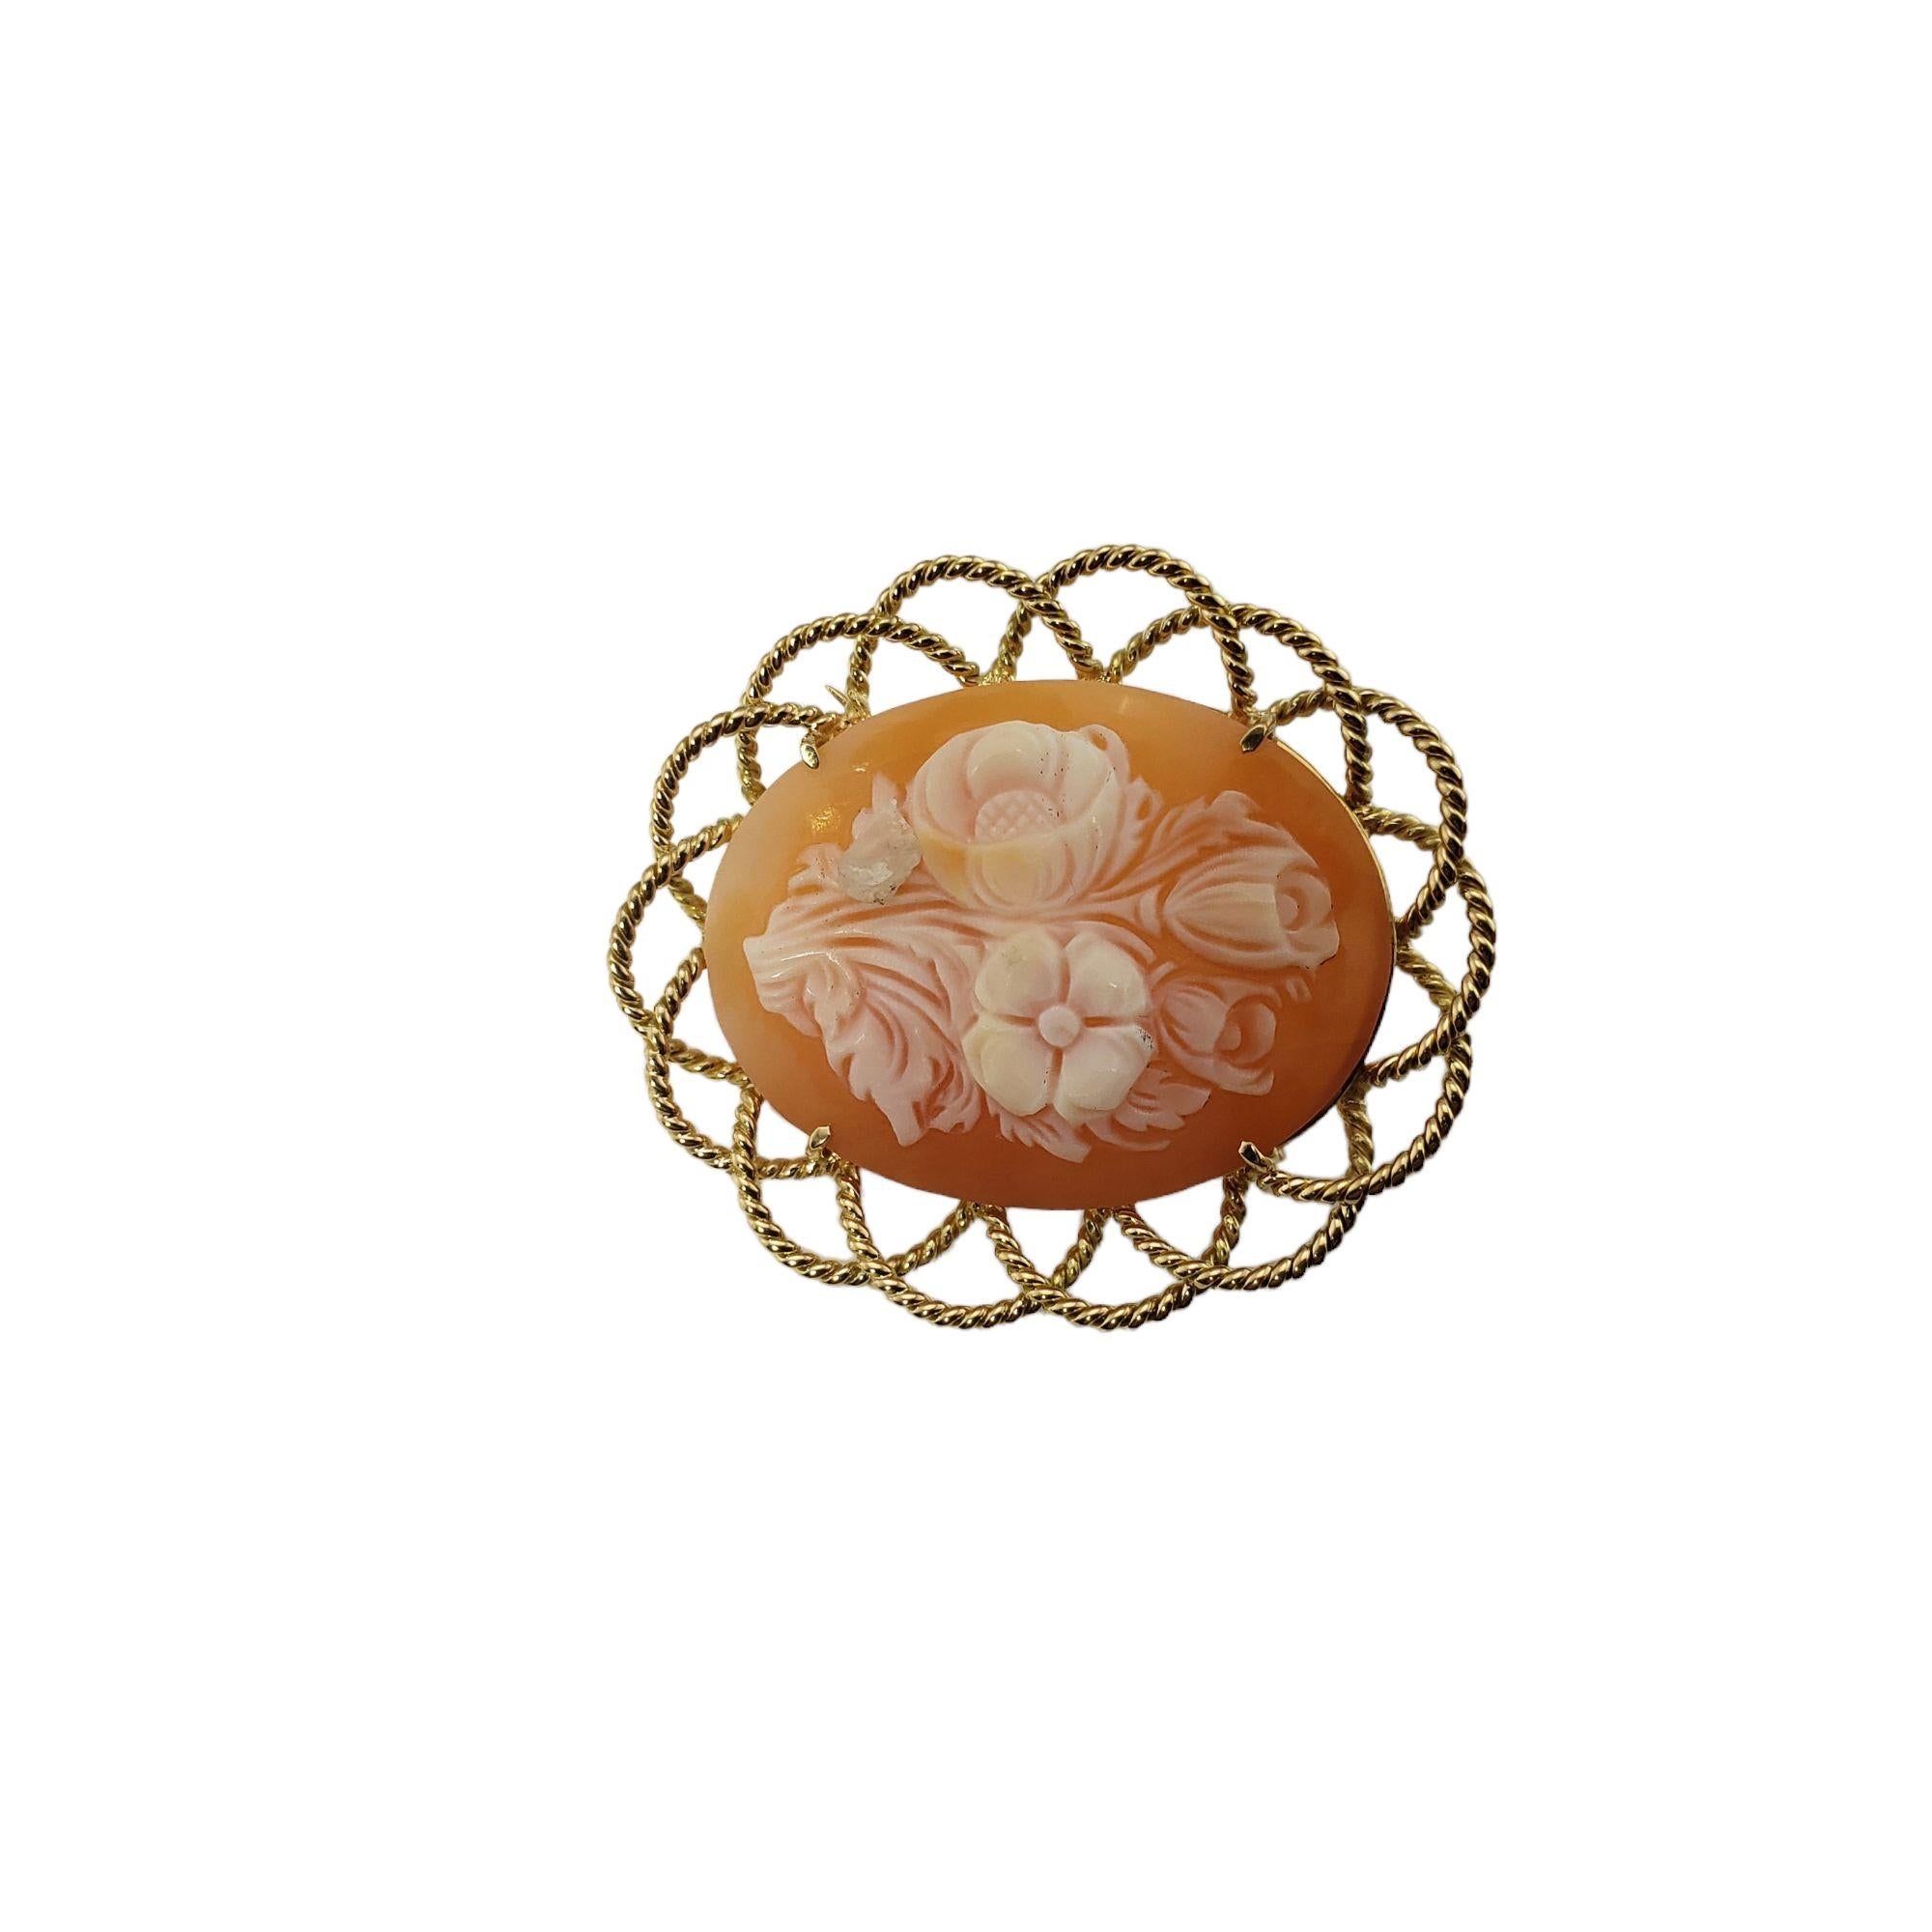 Vintage 18 Karat Yellow Gold Floral Cameo Brooch/Pin-

This stunning floral cameo brooch is framed in beautifully detailed 18K yellow gold.

Size: 38 mm x 33 mm

Weight: 4.8 dwt. / 7.6 gr.

Tested 18K gold.

Very good condition, professionally